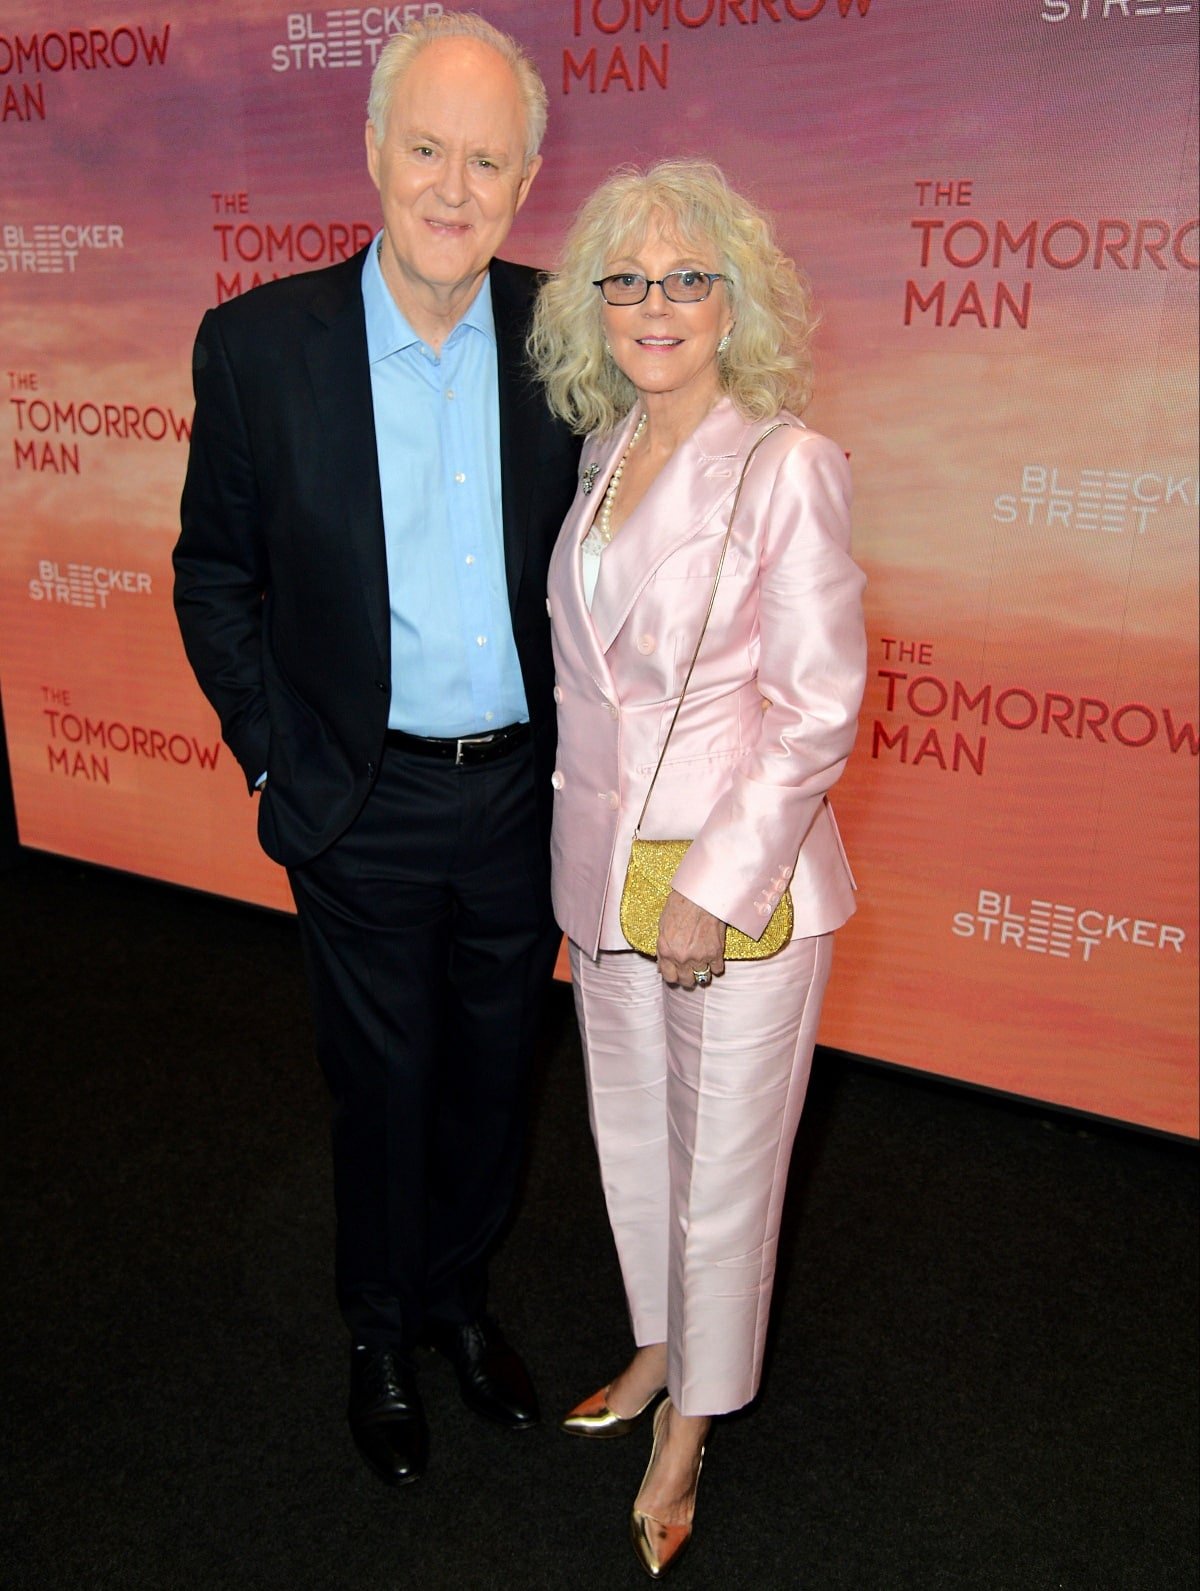 At five feet and seven inches, Blythe Danner is shorter than John Lithgow, who towers over her at six feet and four inches